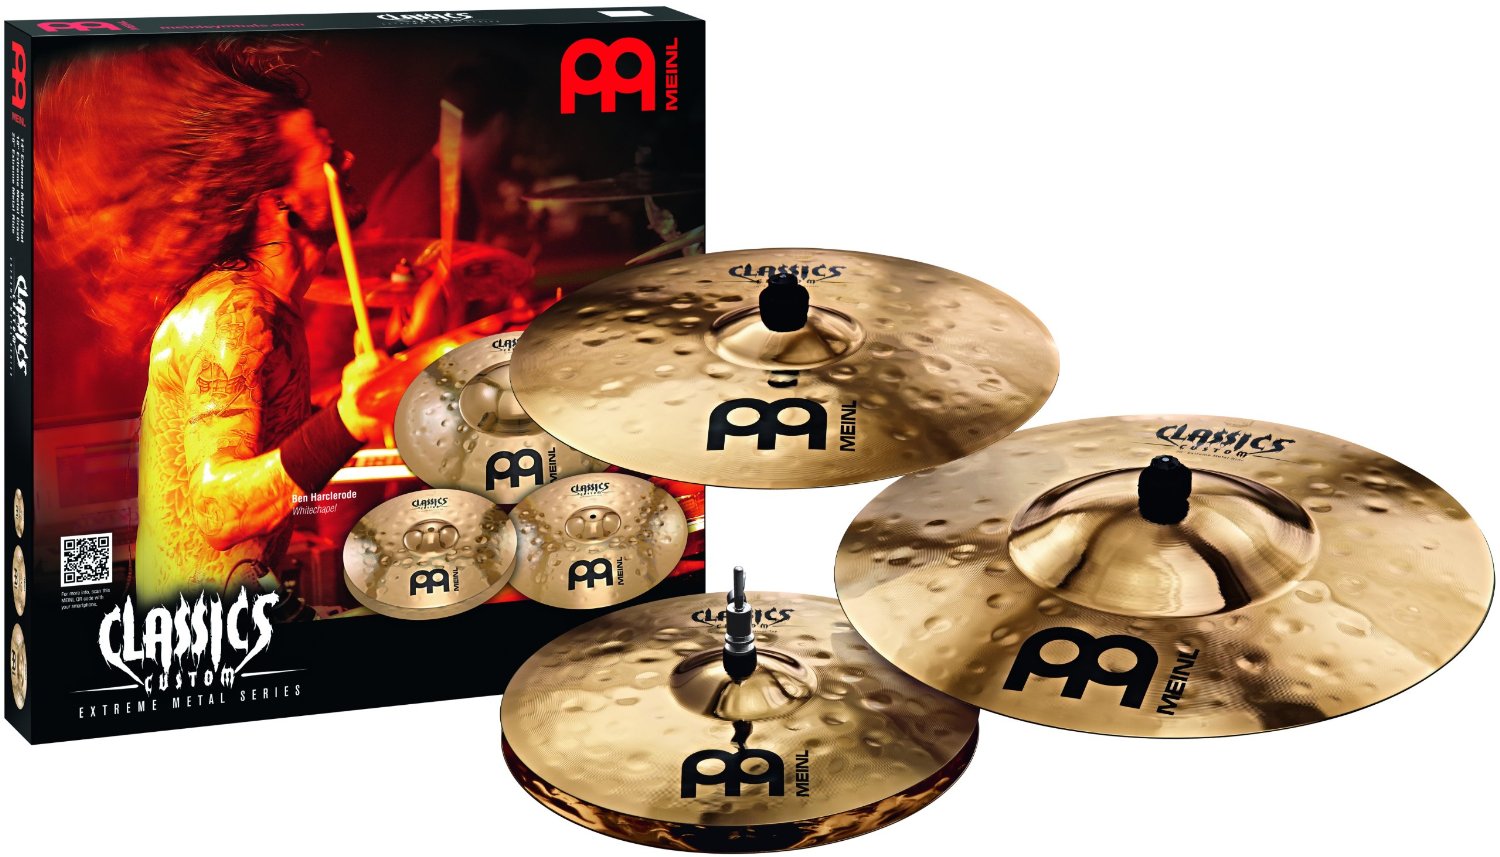 An image of Meinl Classics Custom Extreme Metal Series Cymbal Set | PMT Online